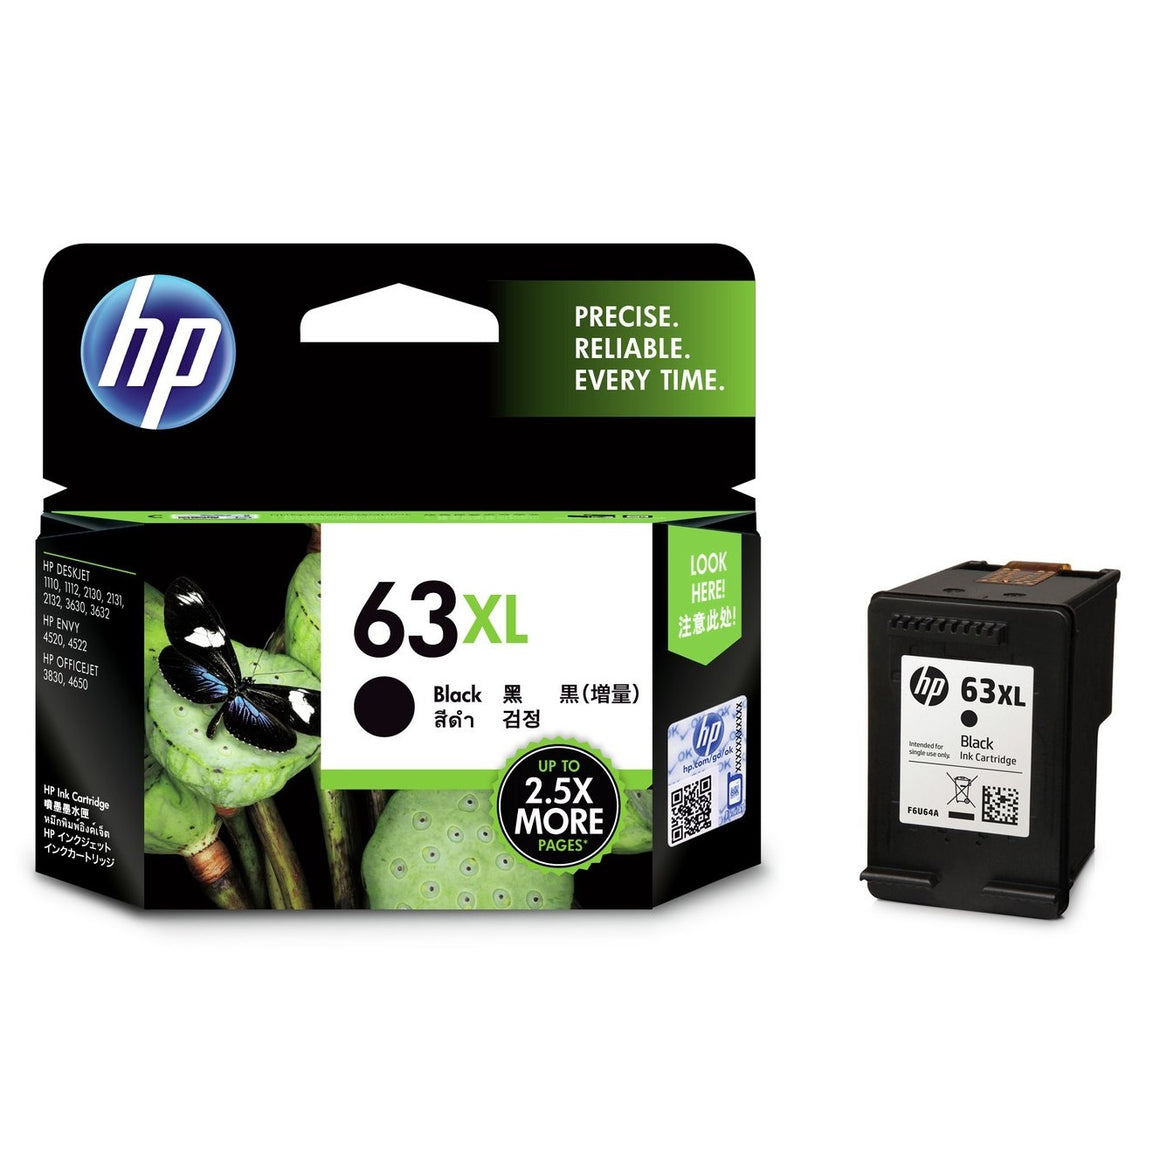 Hp 63xl Ink Cartridge Black High Yield On Sale Now Color Station Website 3727